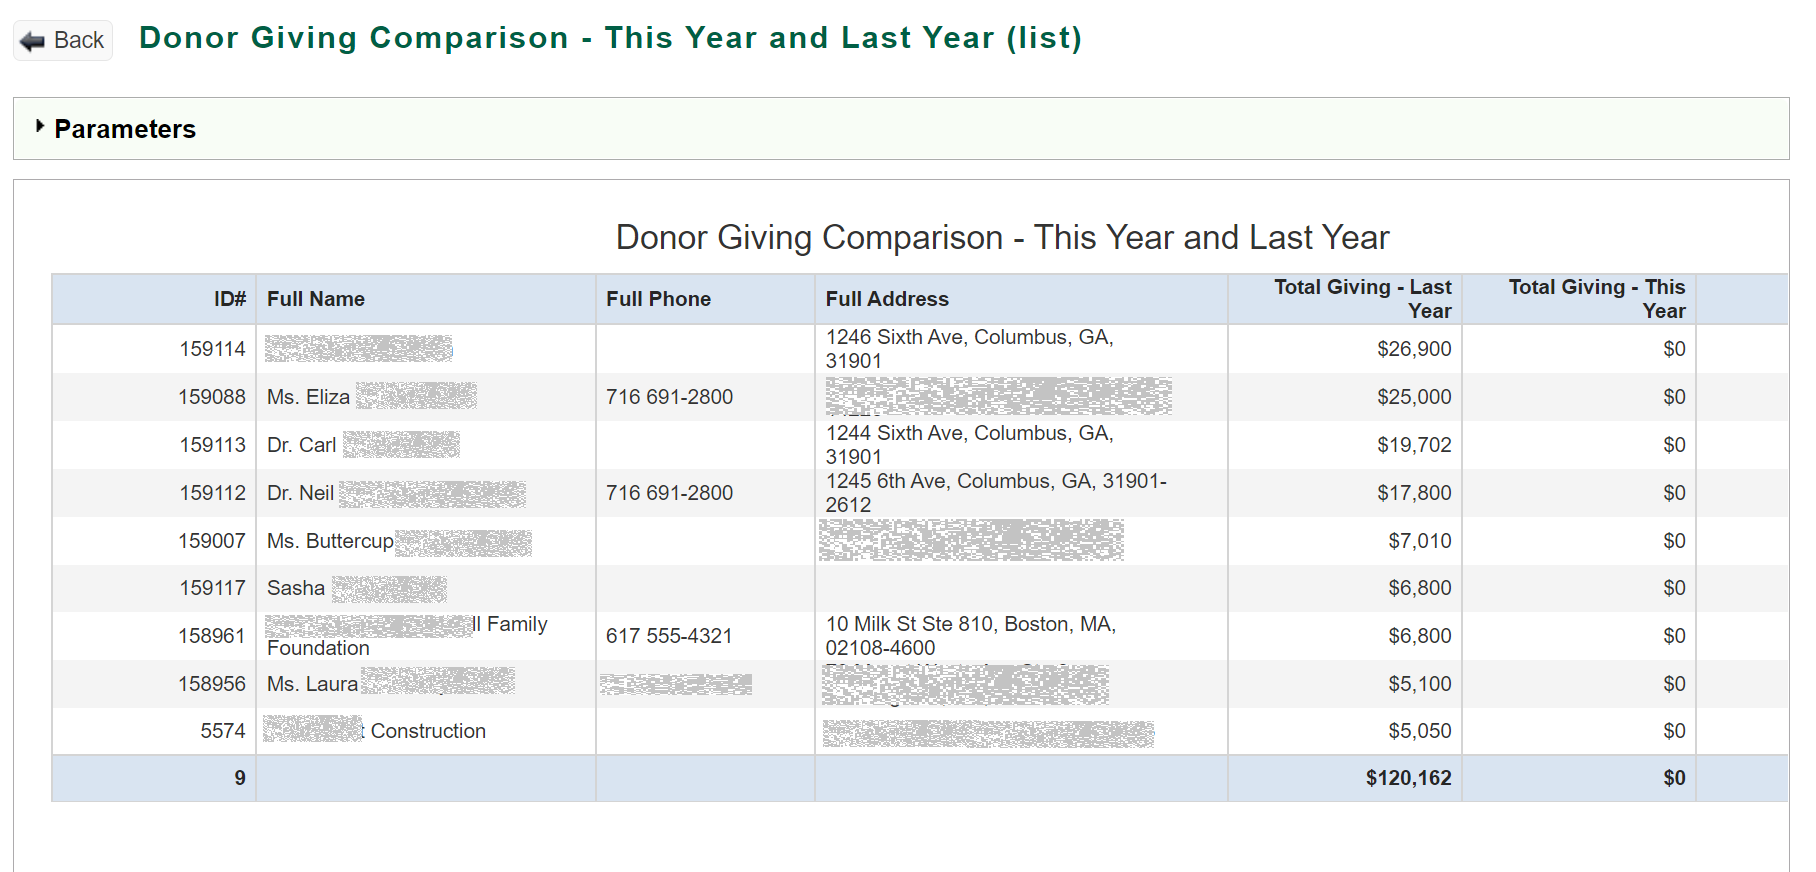 Donor Giving Comparison This Year and Last Year list